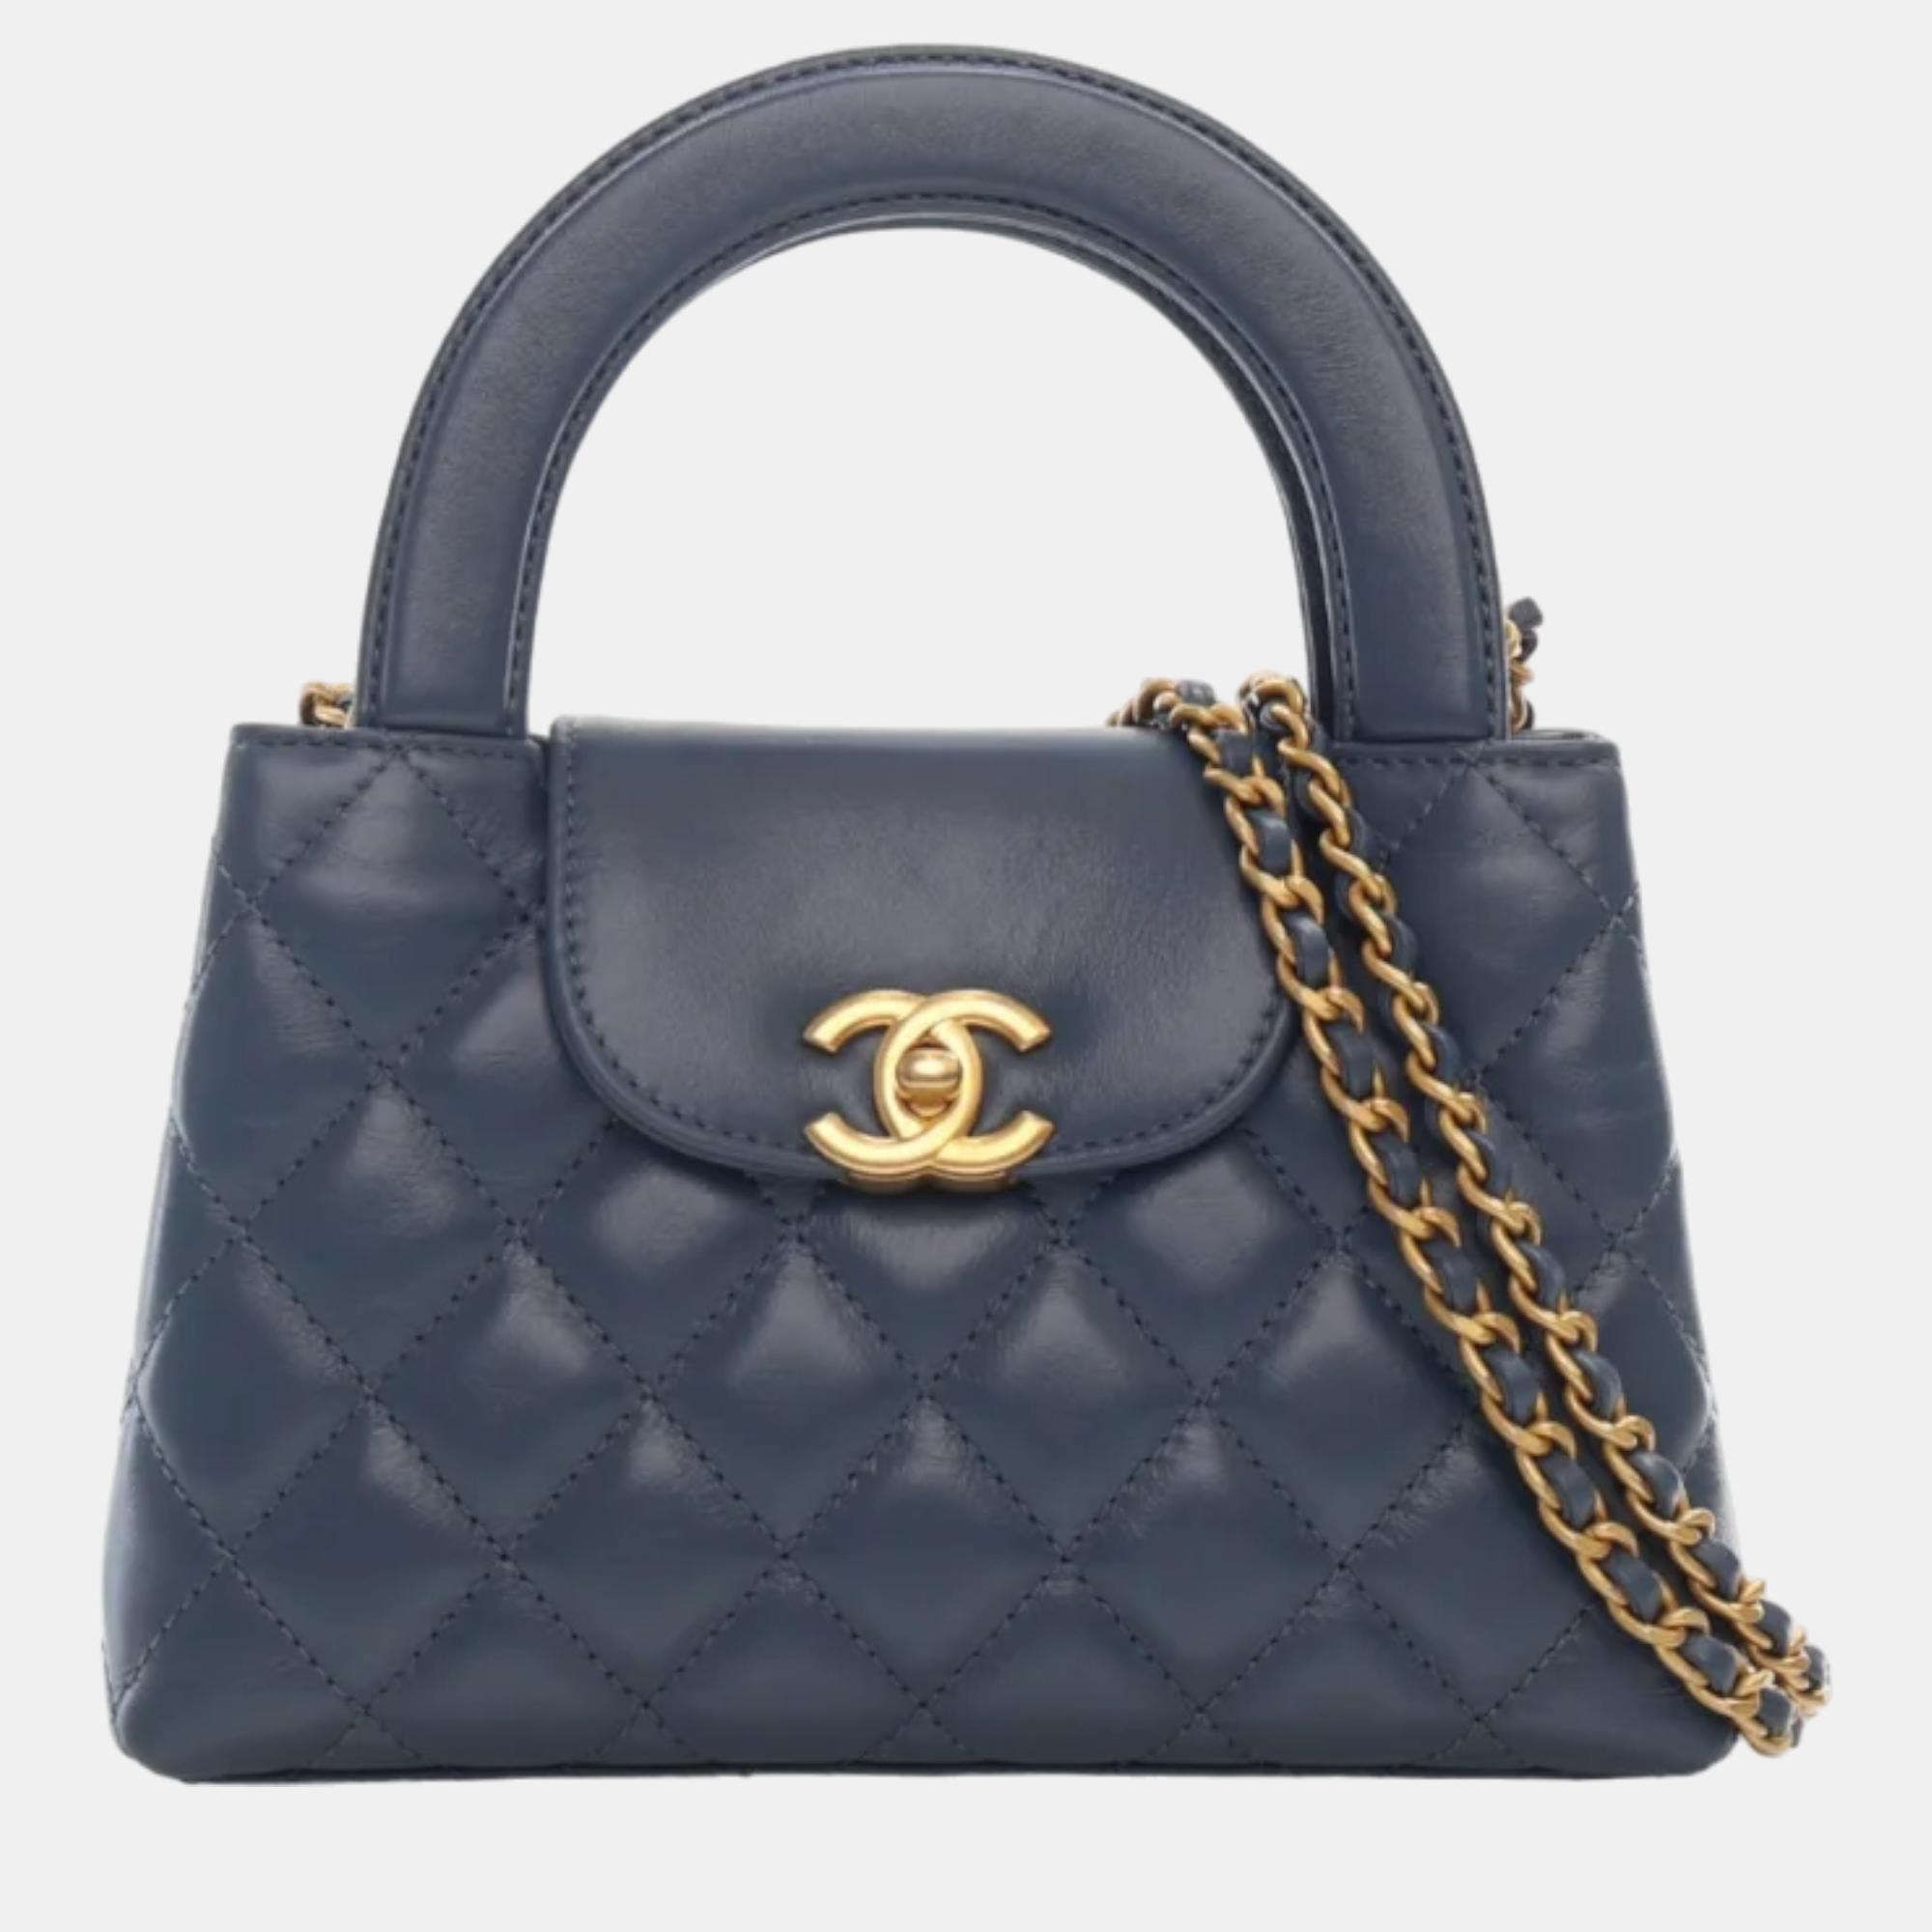 Chanel blue leather small kelly top handle bags